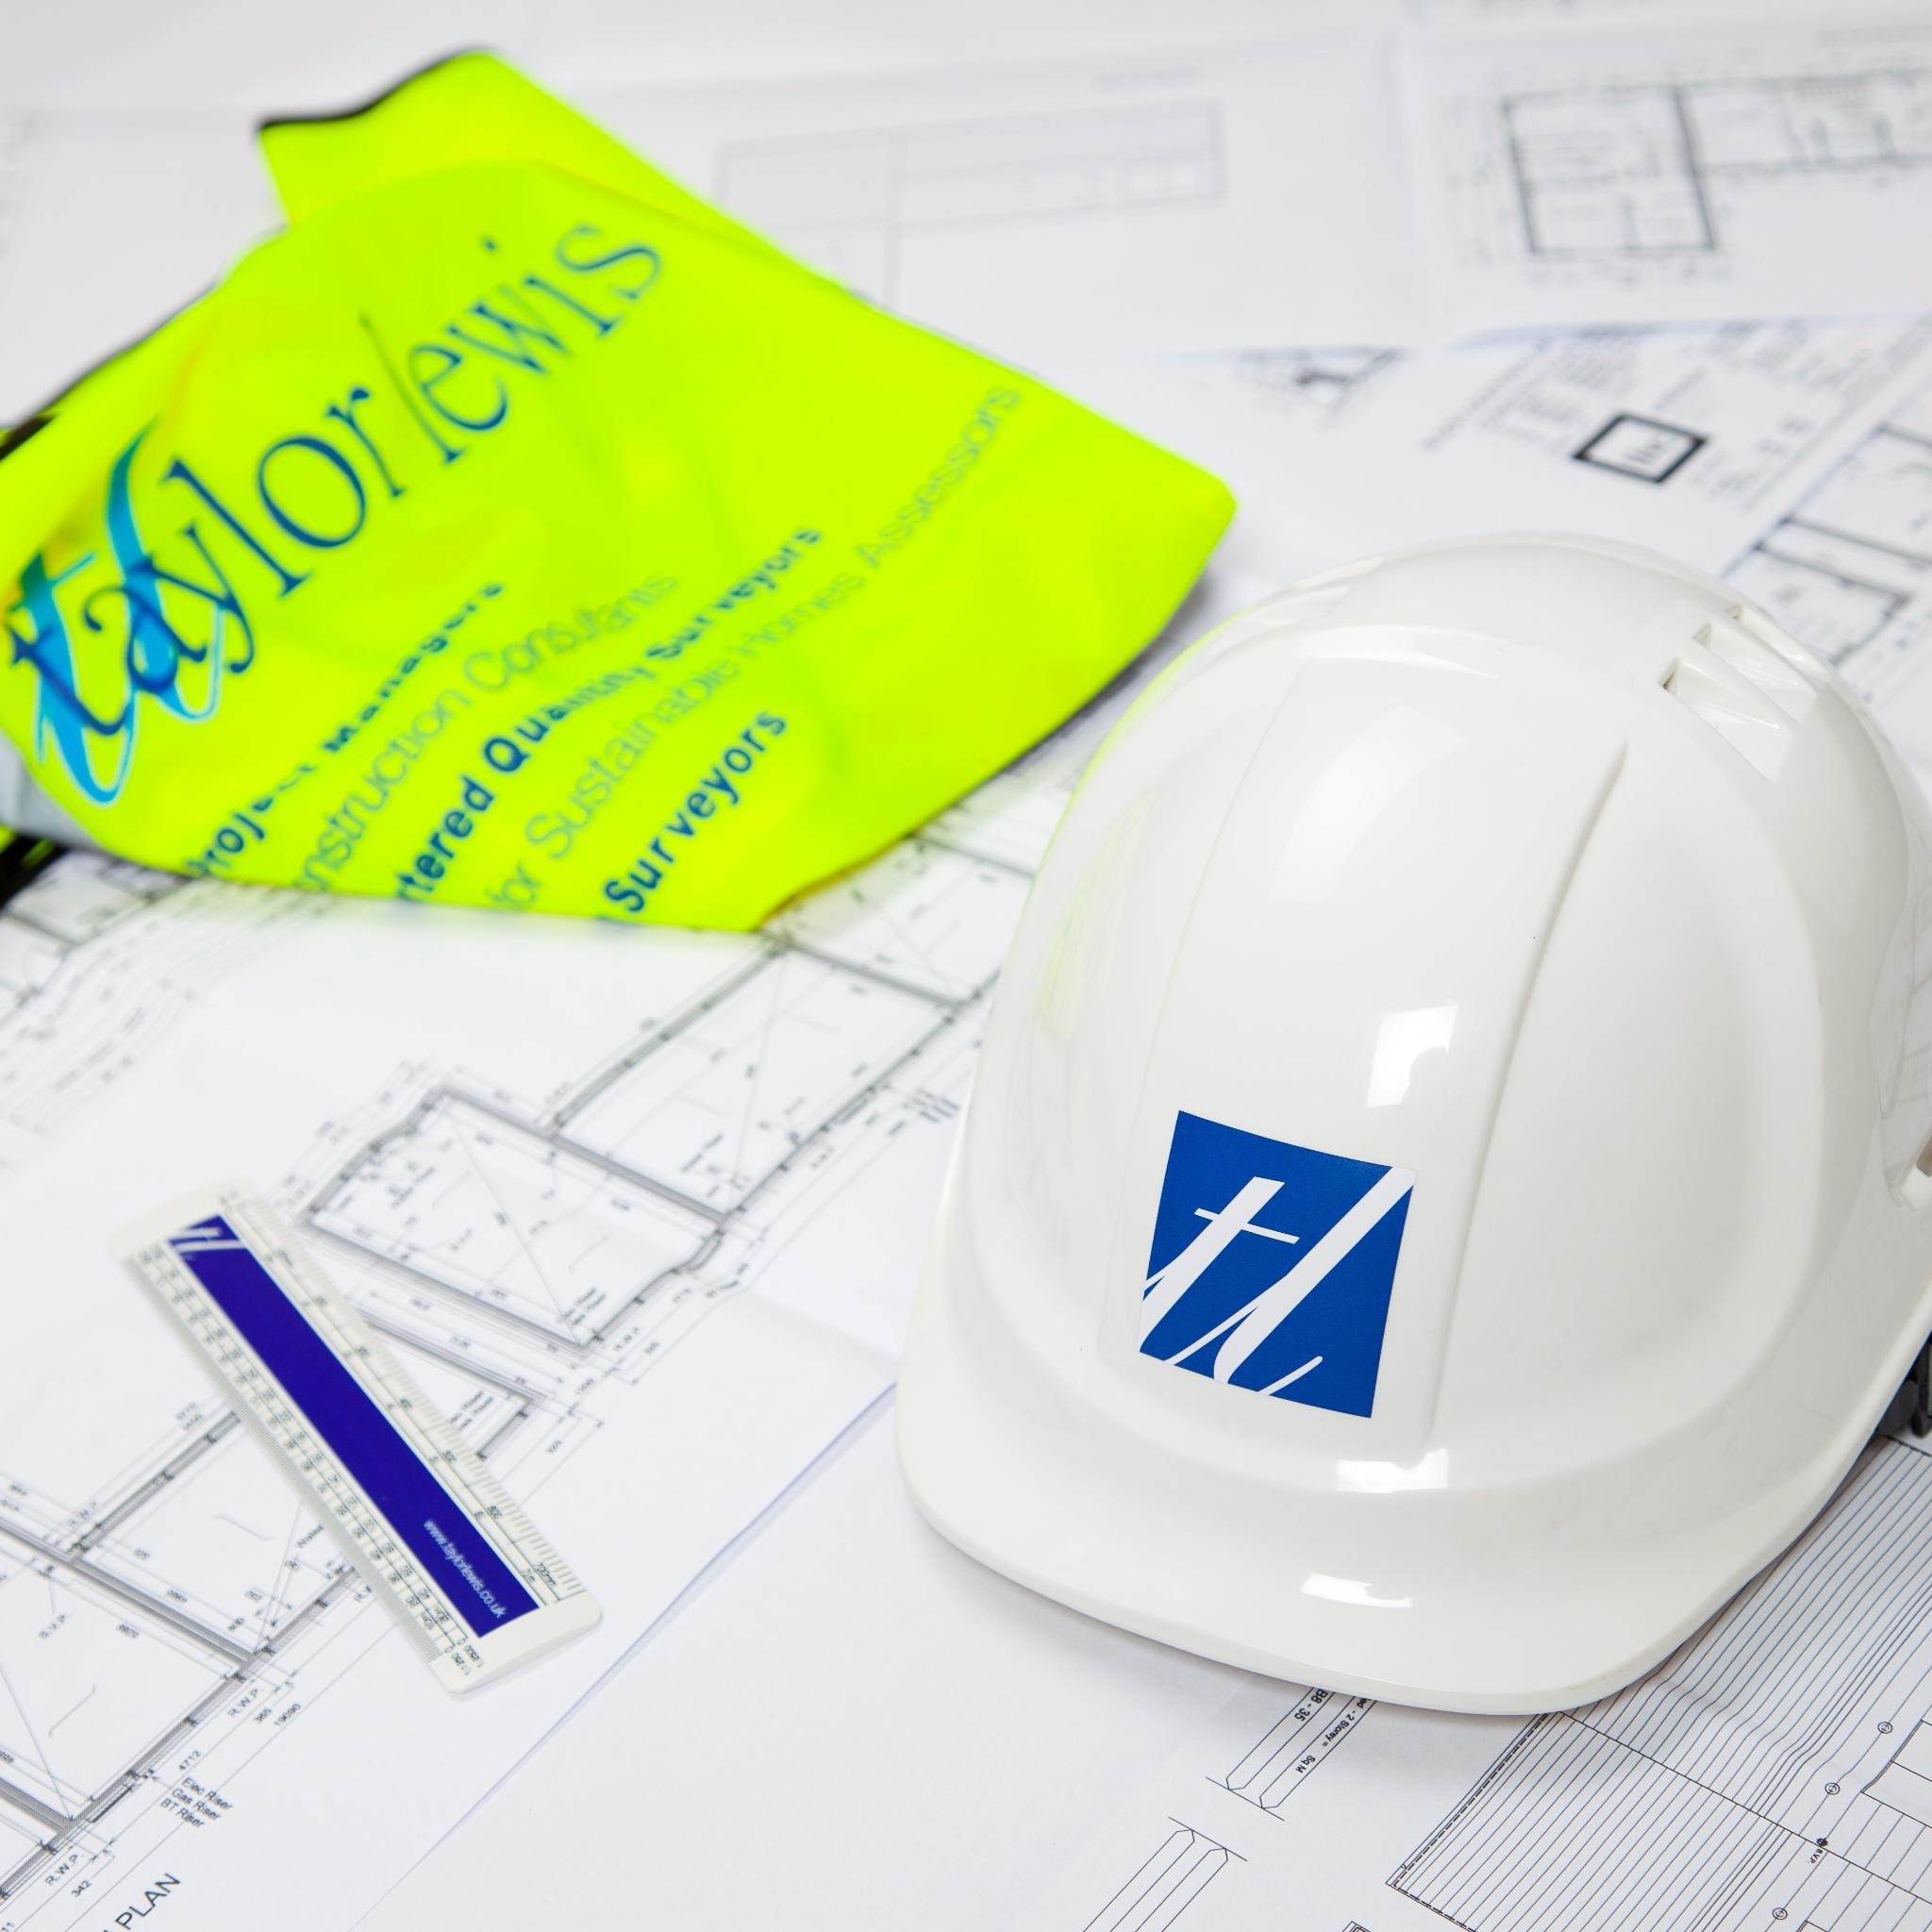 Taylor Lewis has established itself as one of the most respected and reliable Quantity Surveying and Construction Consultancy firms in the South West.